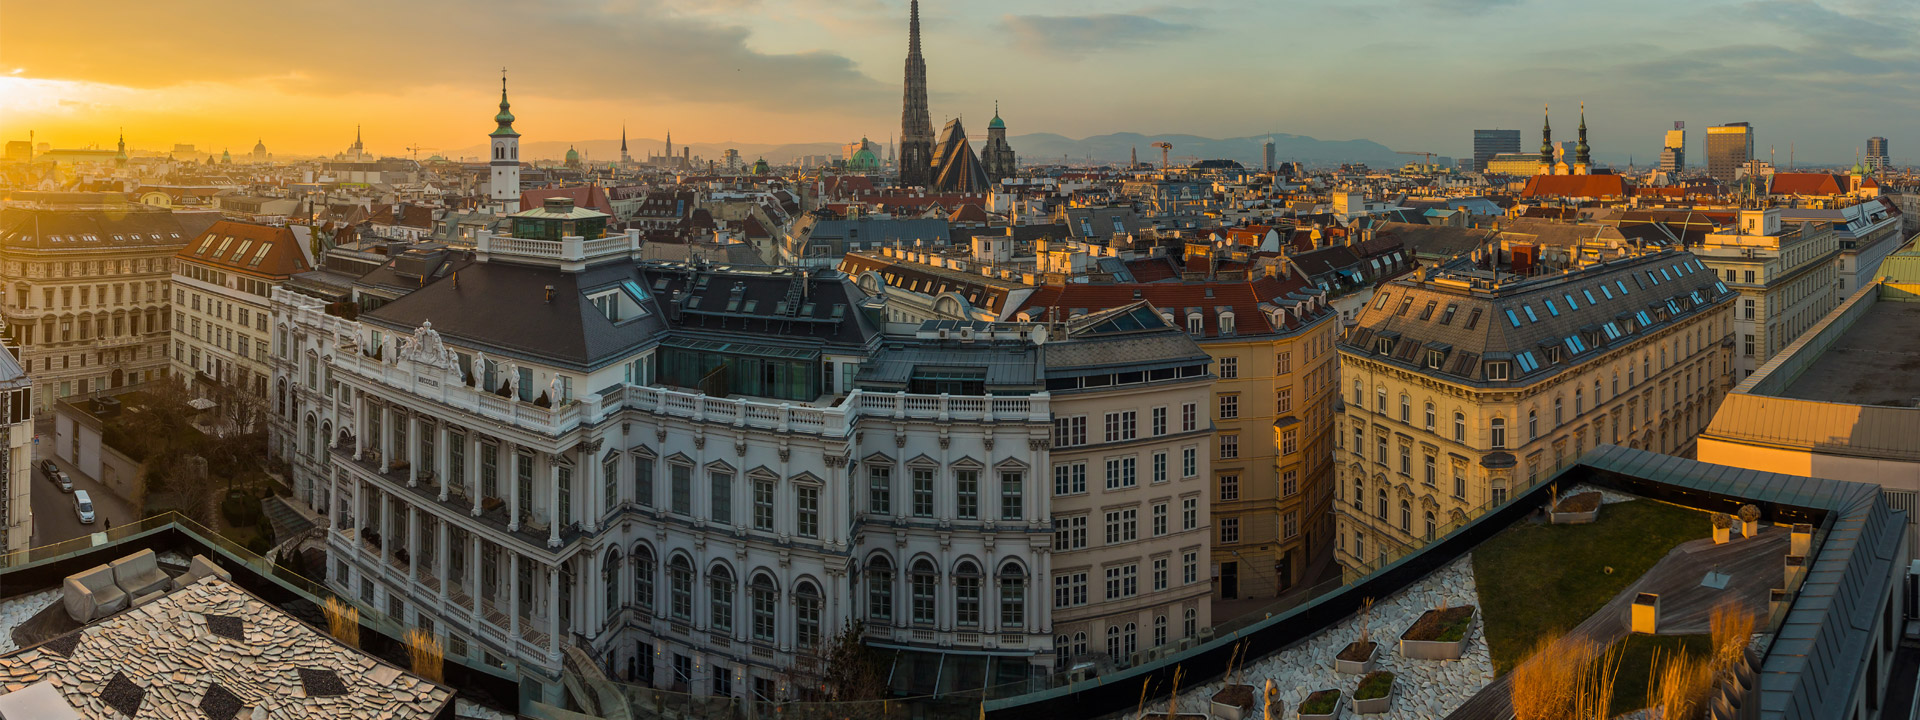 Can’t-Miss Adventures The Next Time You’re in Vienna